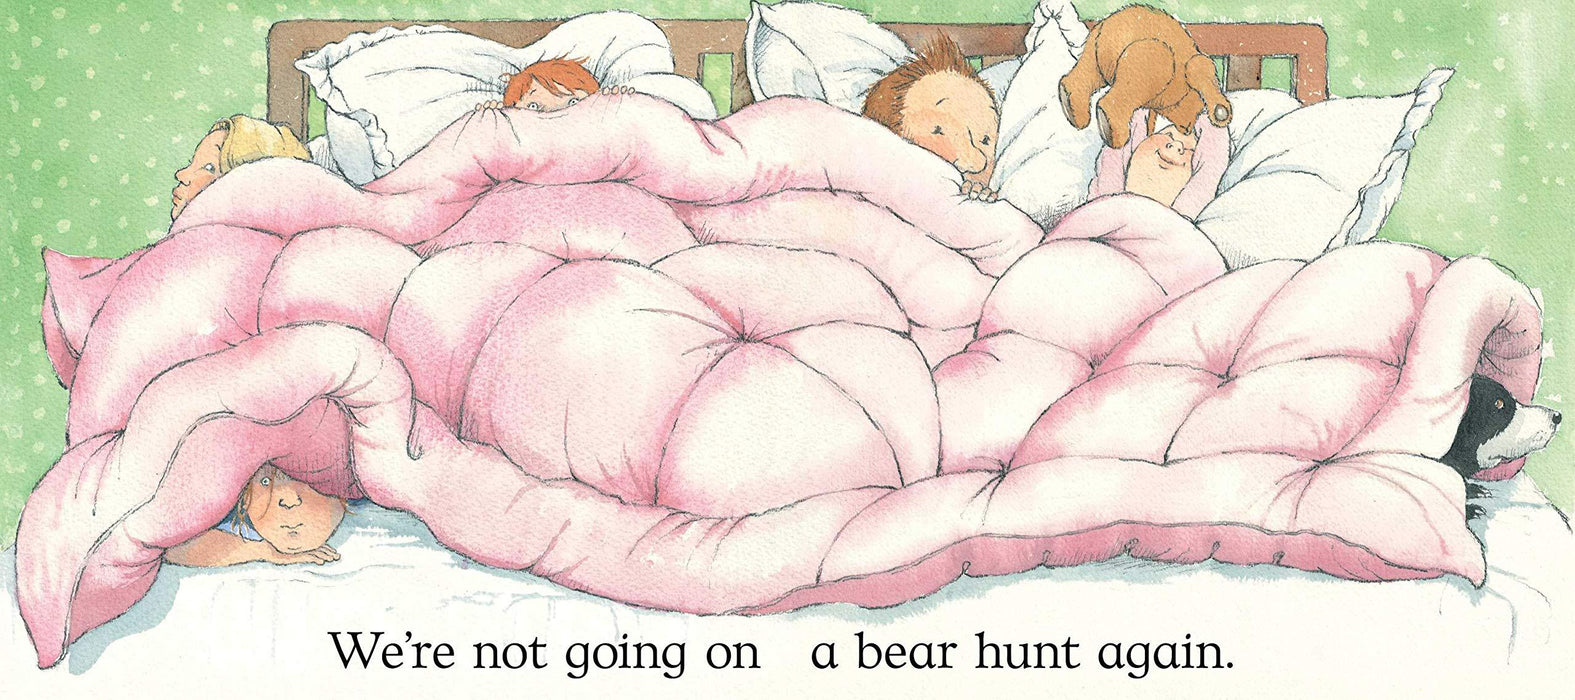 We're Going on a Bear Hunt (Board Book) - My Playroom 